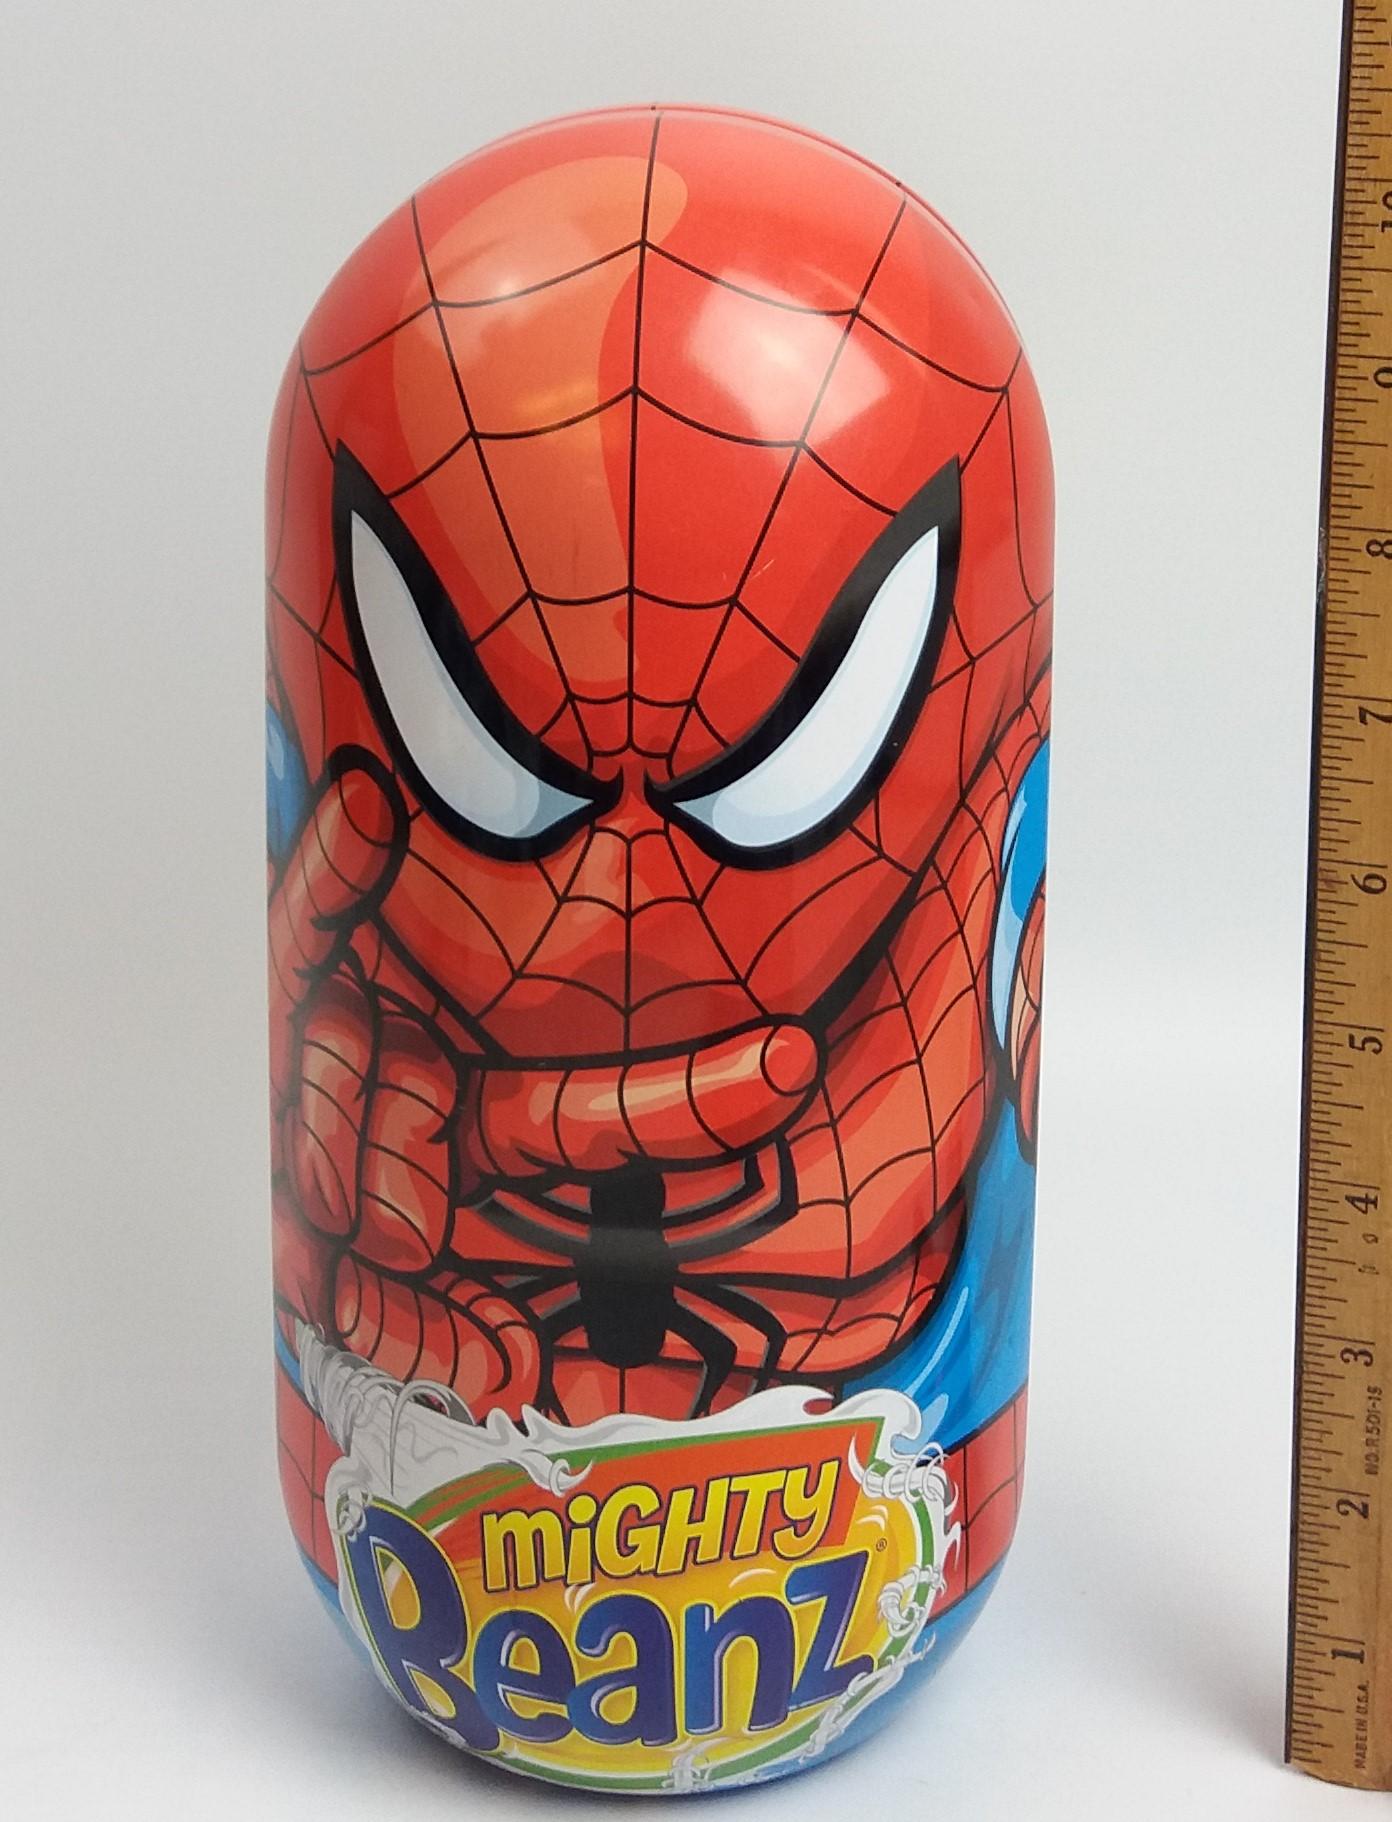 Marvel Mighty Beanz Spider-Man Collector's Tin